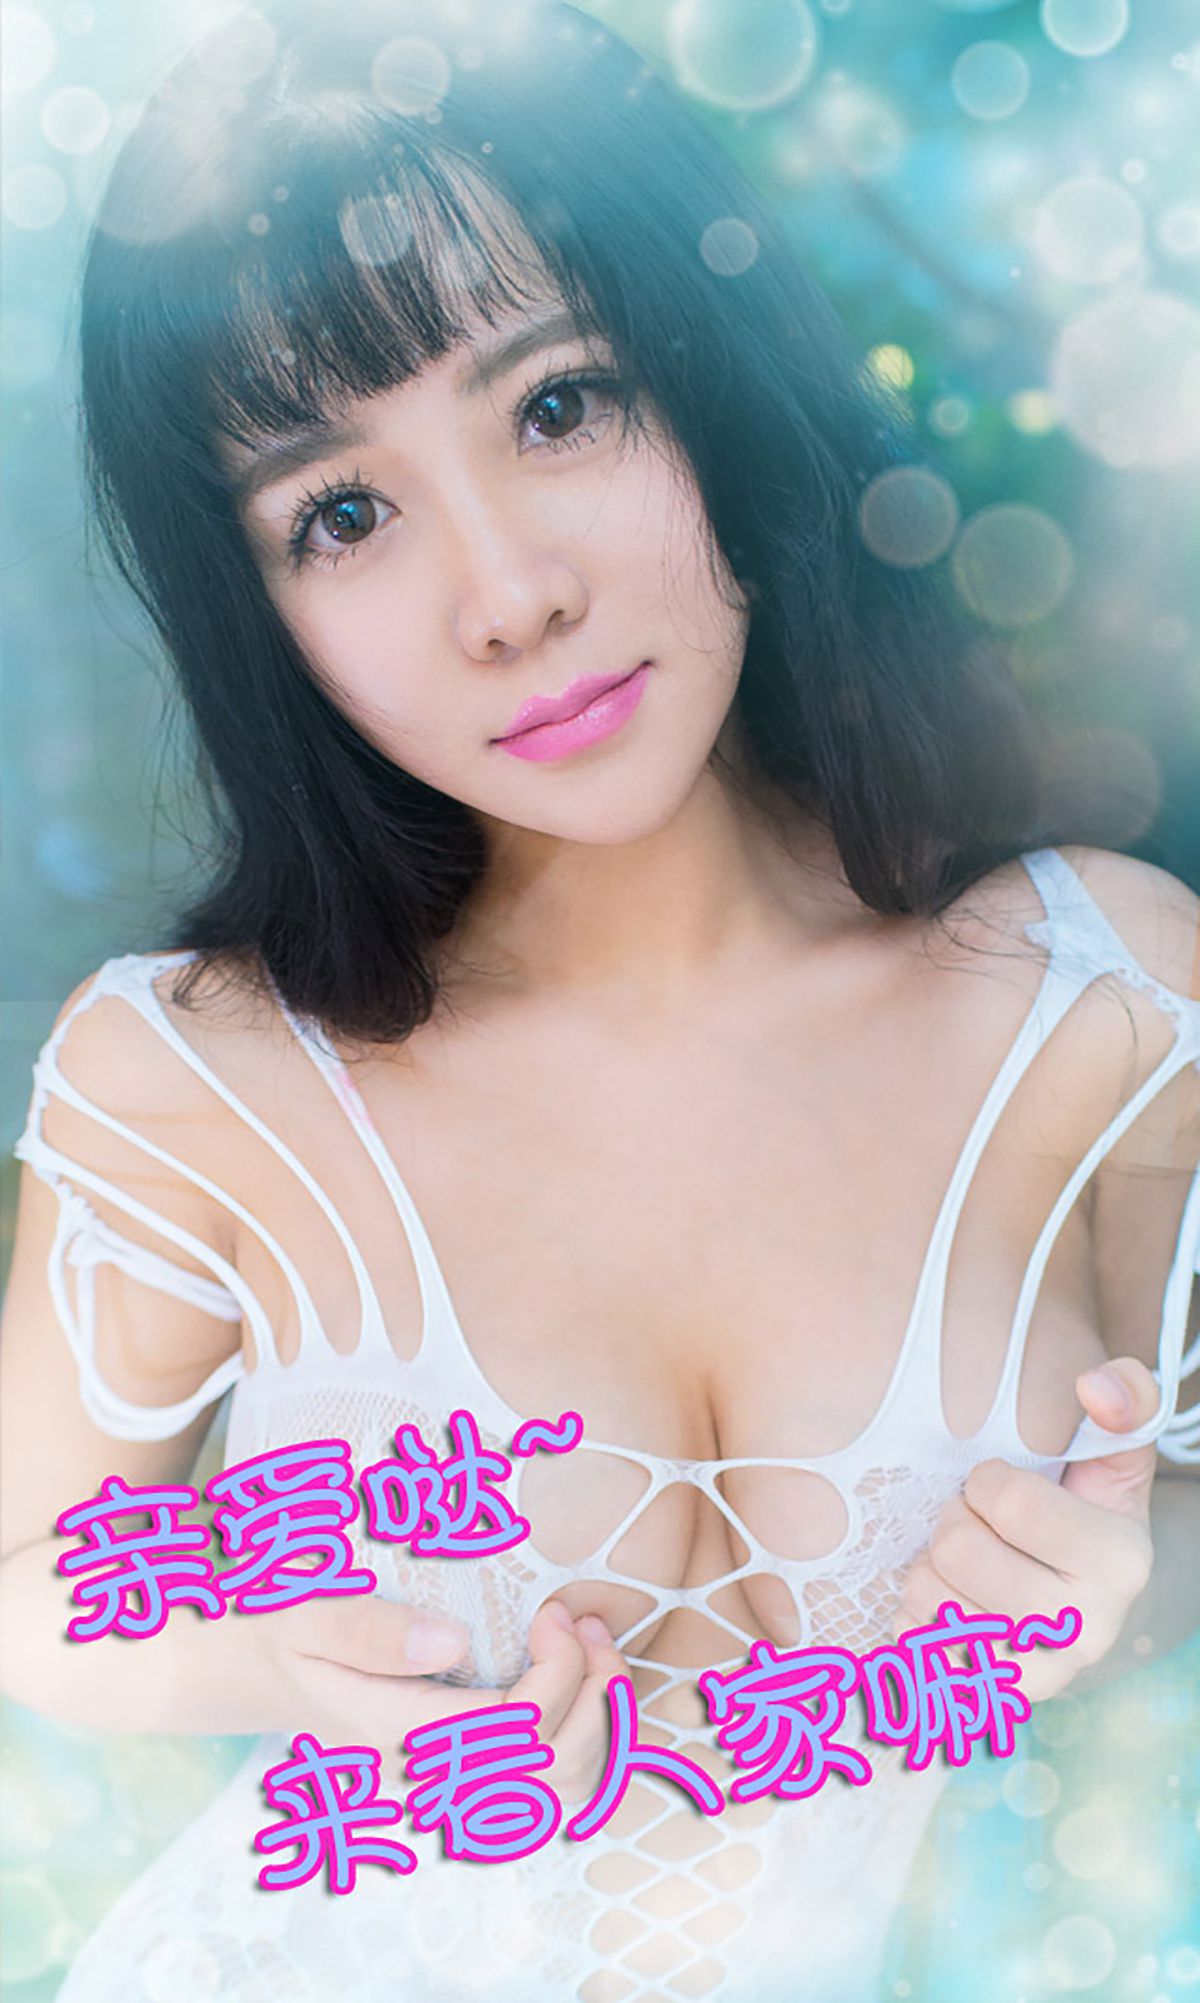 Ling Zhi’s “Leading the Family Has a Girl Begins to Grow” [爱尤物Ugirls] No.140 Photo Album